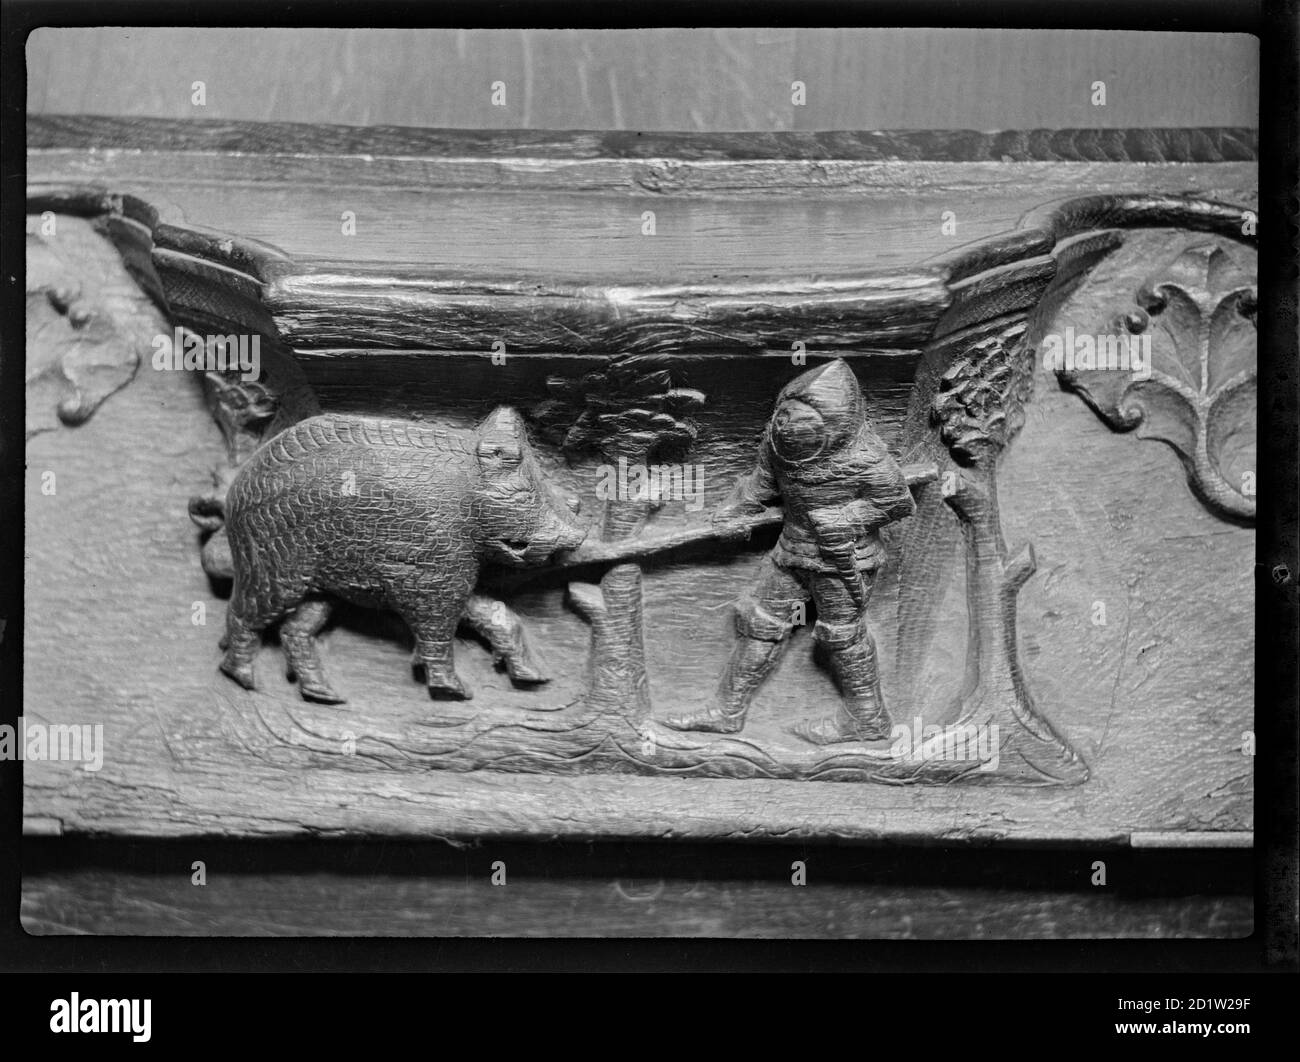 A misericord in St Mary's Church, depicting a knight with a spear attacking a wild boar, North Bar Within, Beverley, East Riding Of Yorkshire, UK. Stock Photo